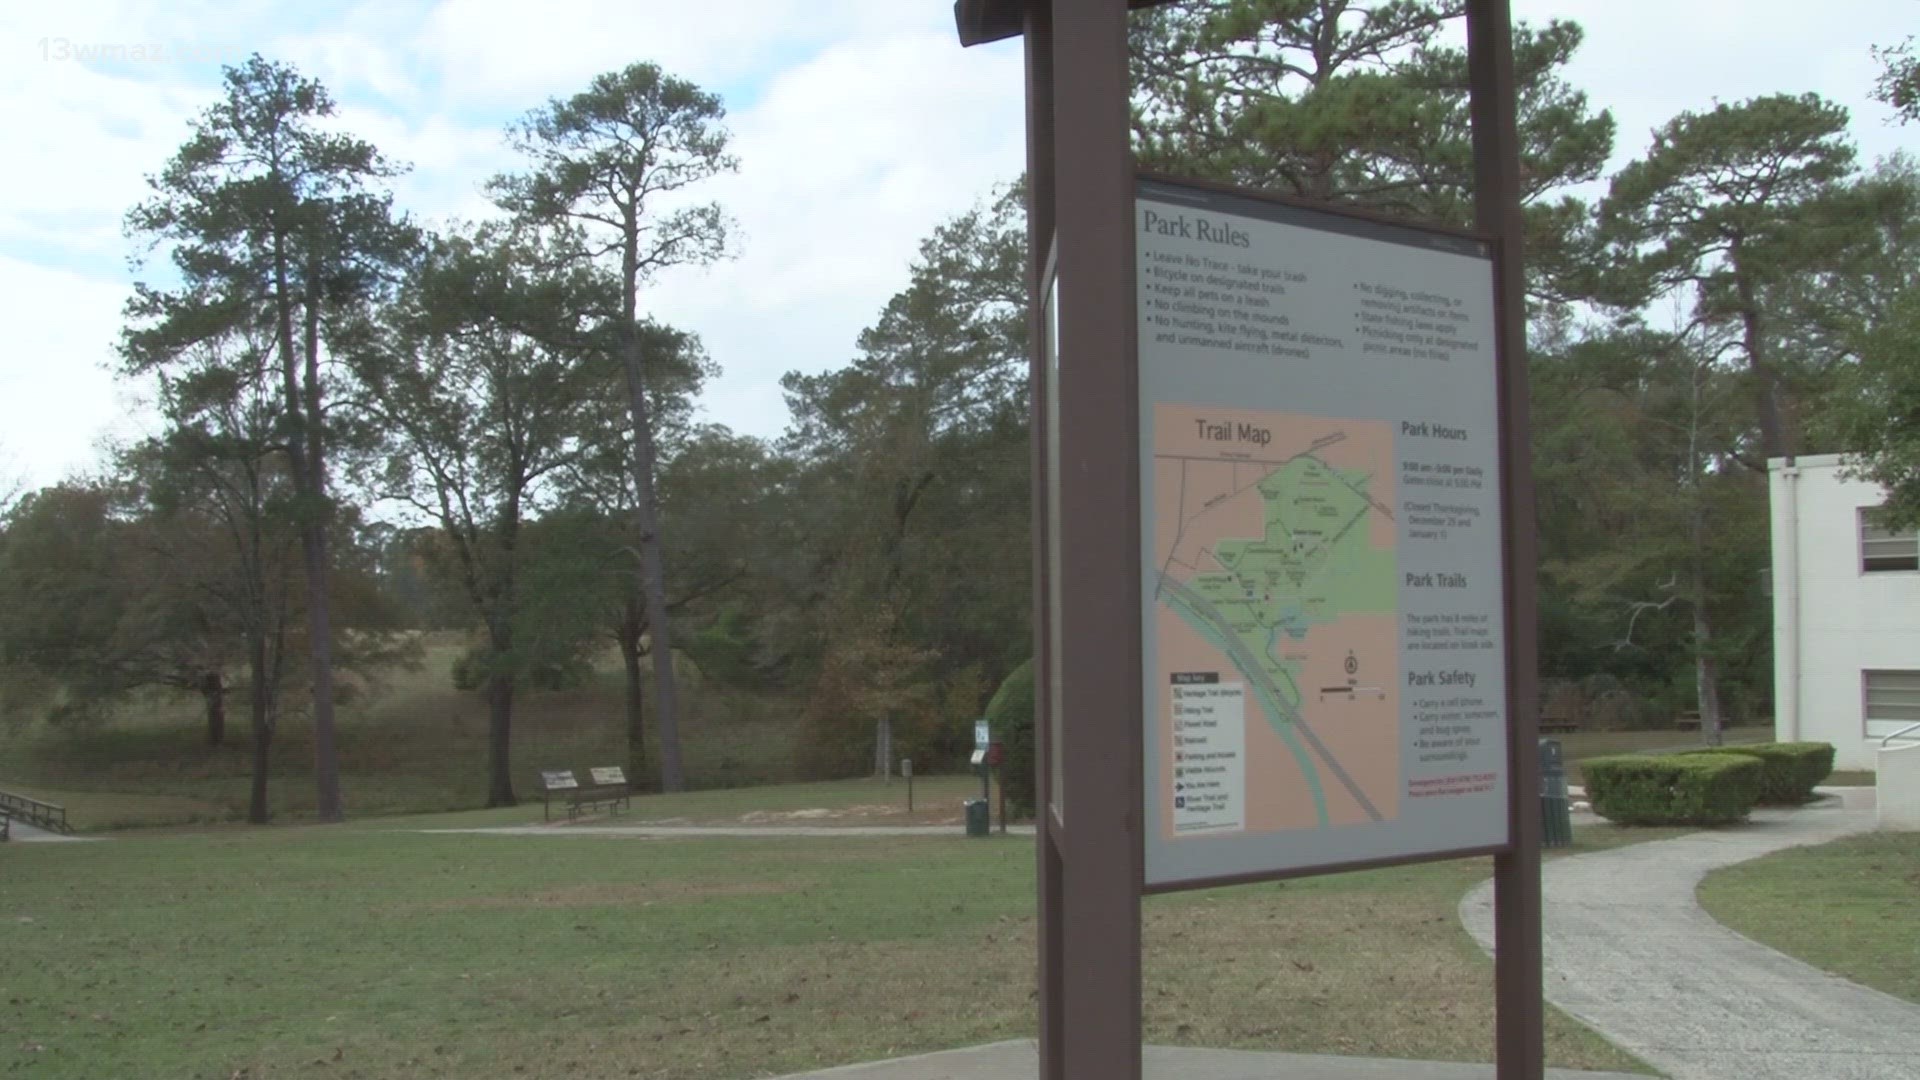 The report released Thursday means the National Park Service won’t recommend that Congress create Georgia’s first national park near Macon.